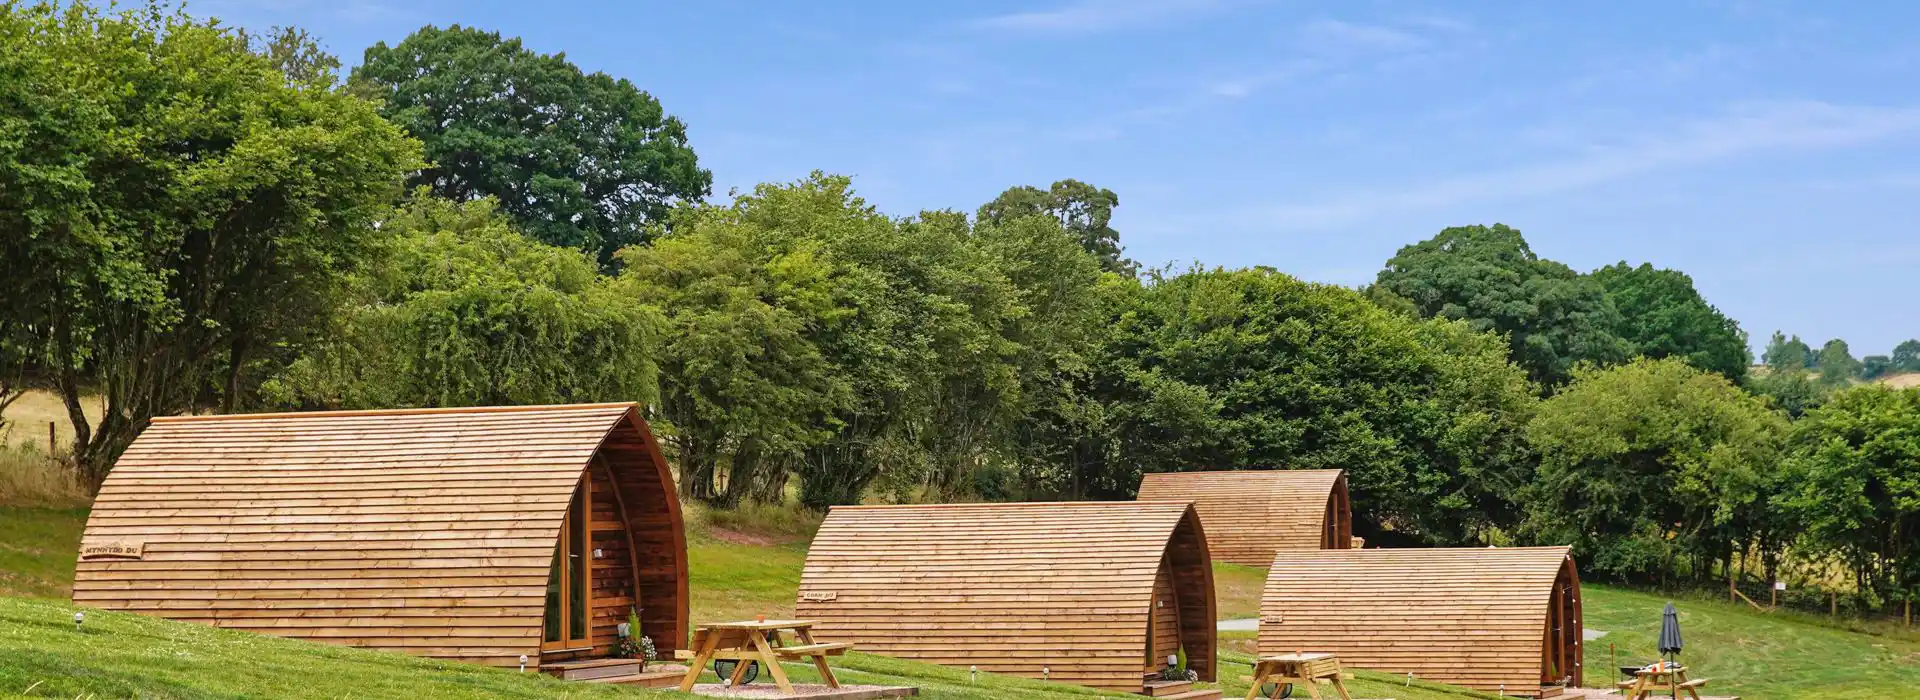 Camping and glamping pods in Brecon